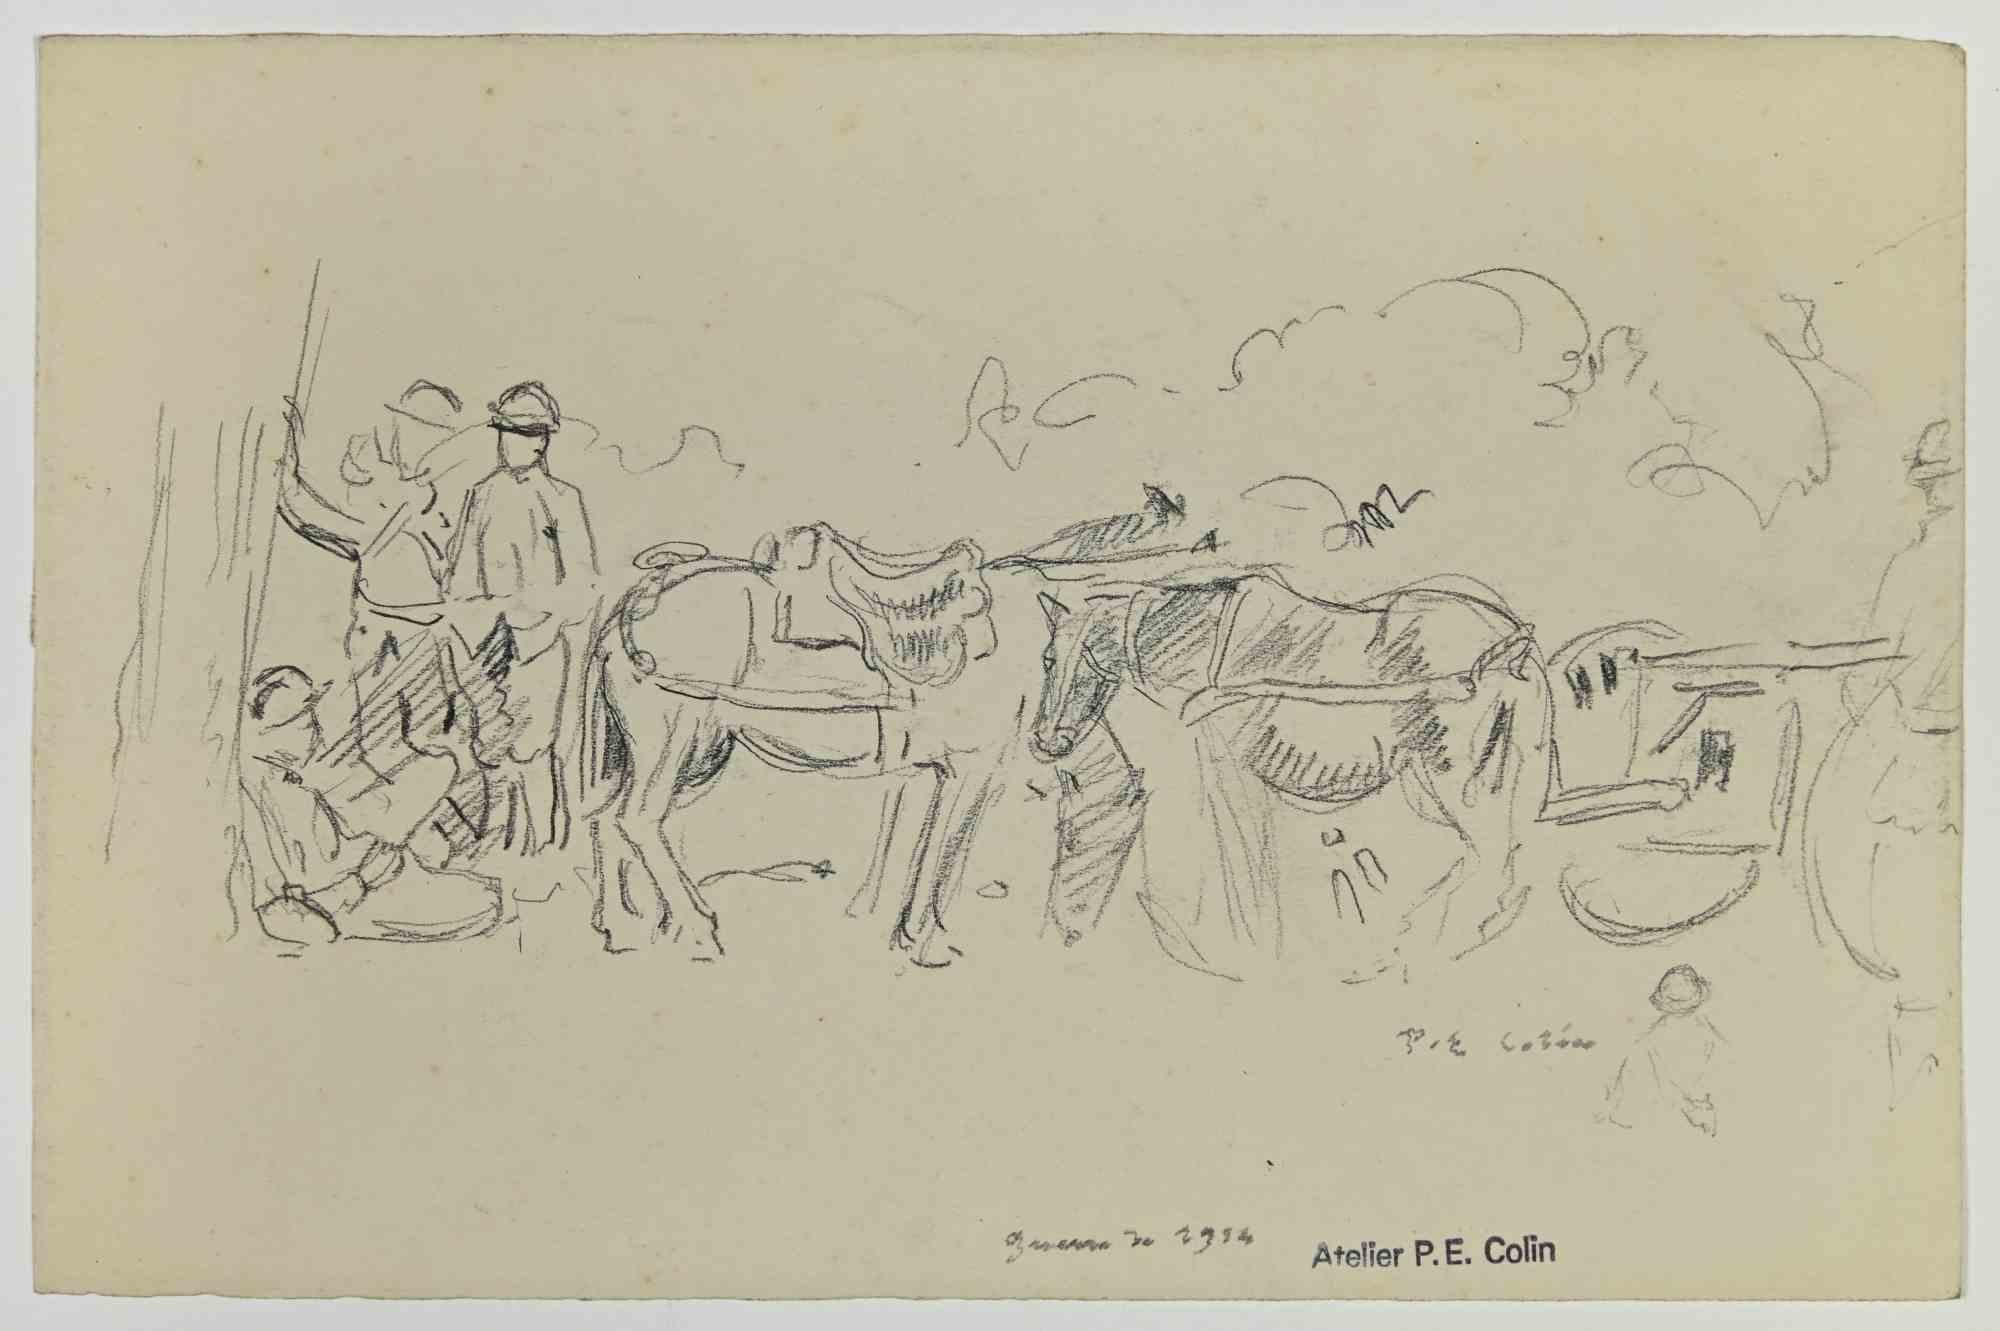 Soldiers is a drawing realized by Paul Emile Colin in the Early 20th Century.

Carbon Pencil on ivory-colored paper

Stamped on the lower.

Good conditions with slight foxing.

The artwork is realized through deft expressive strokes.